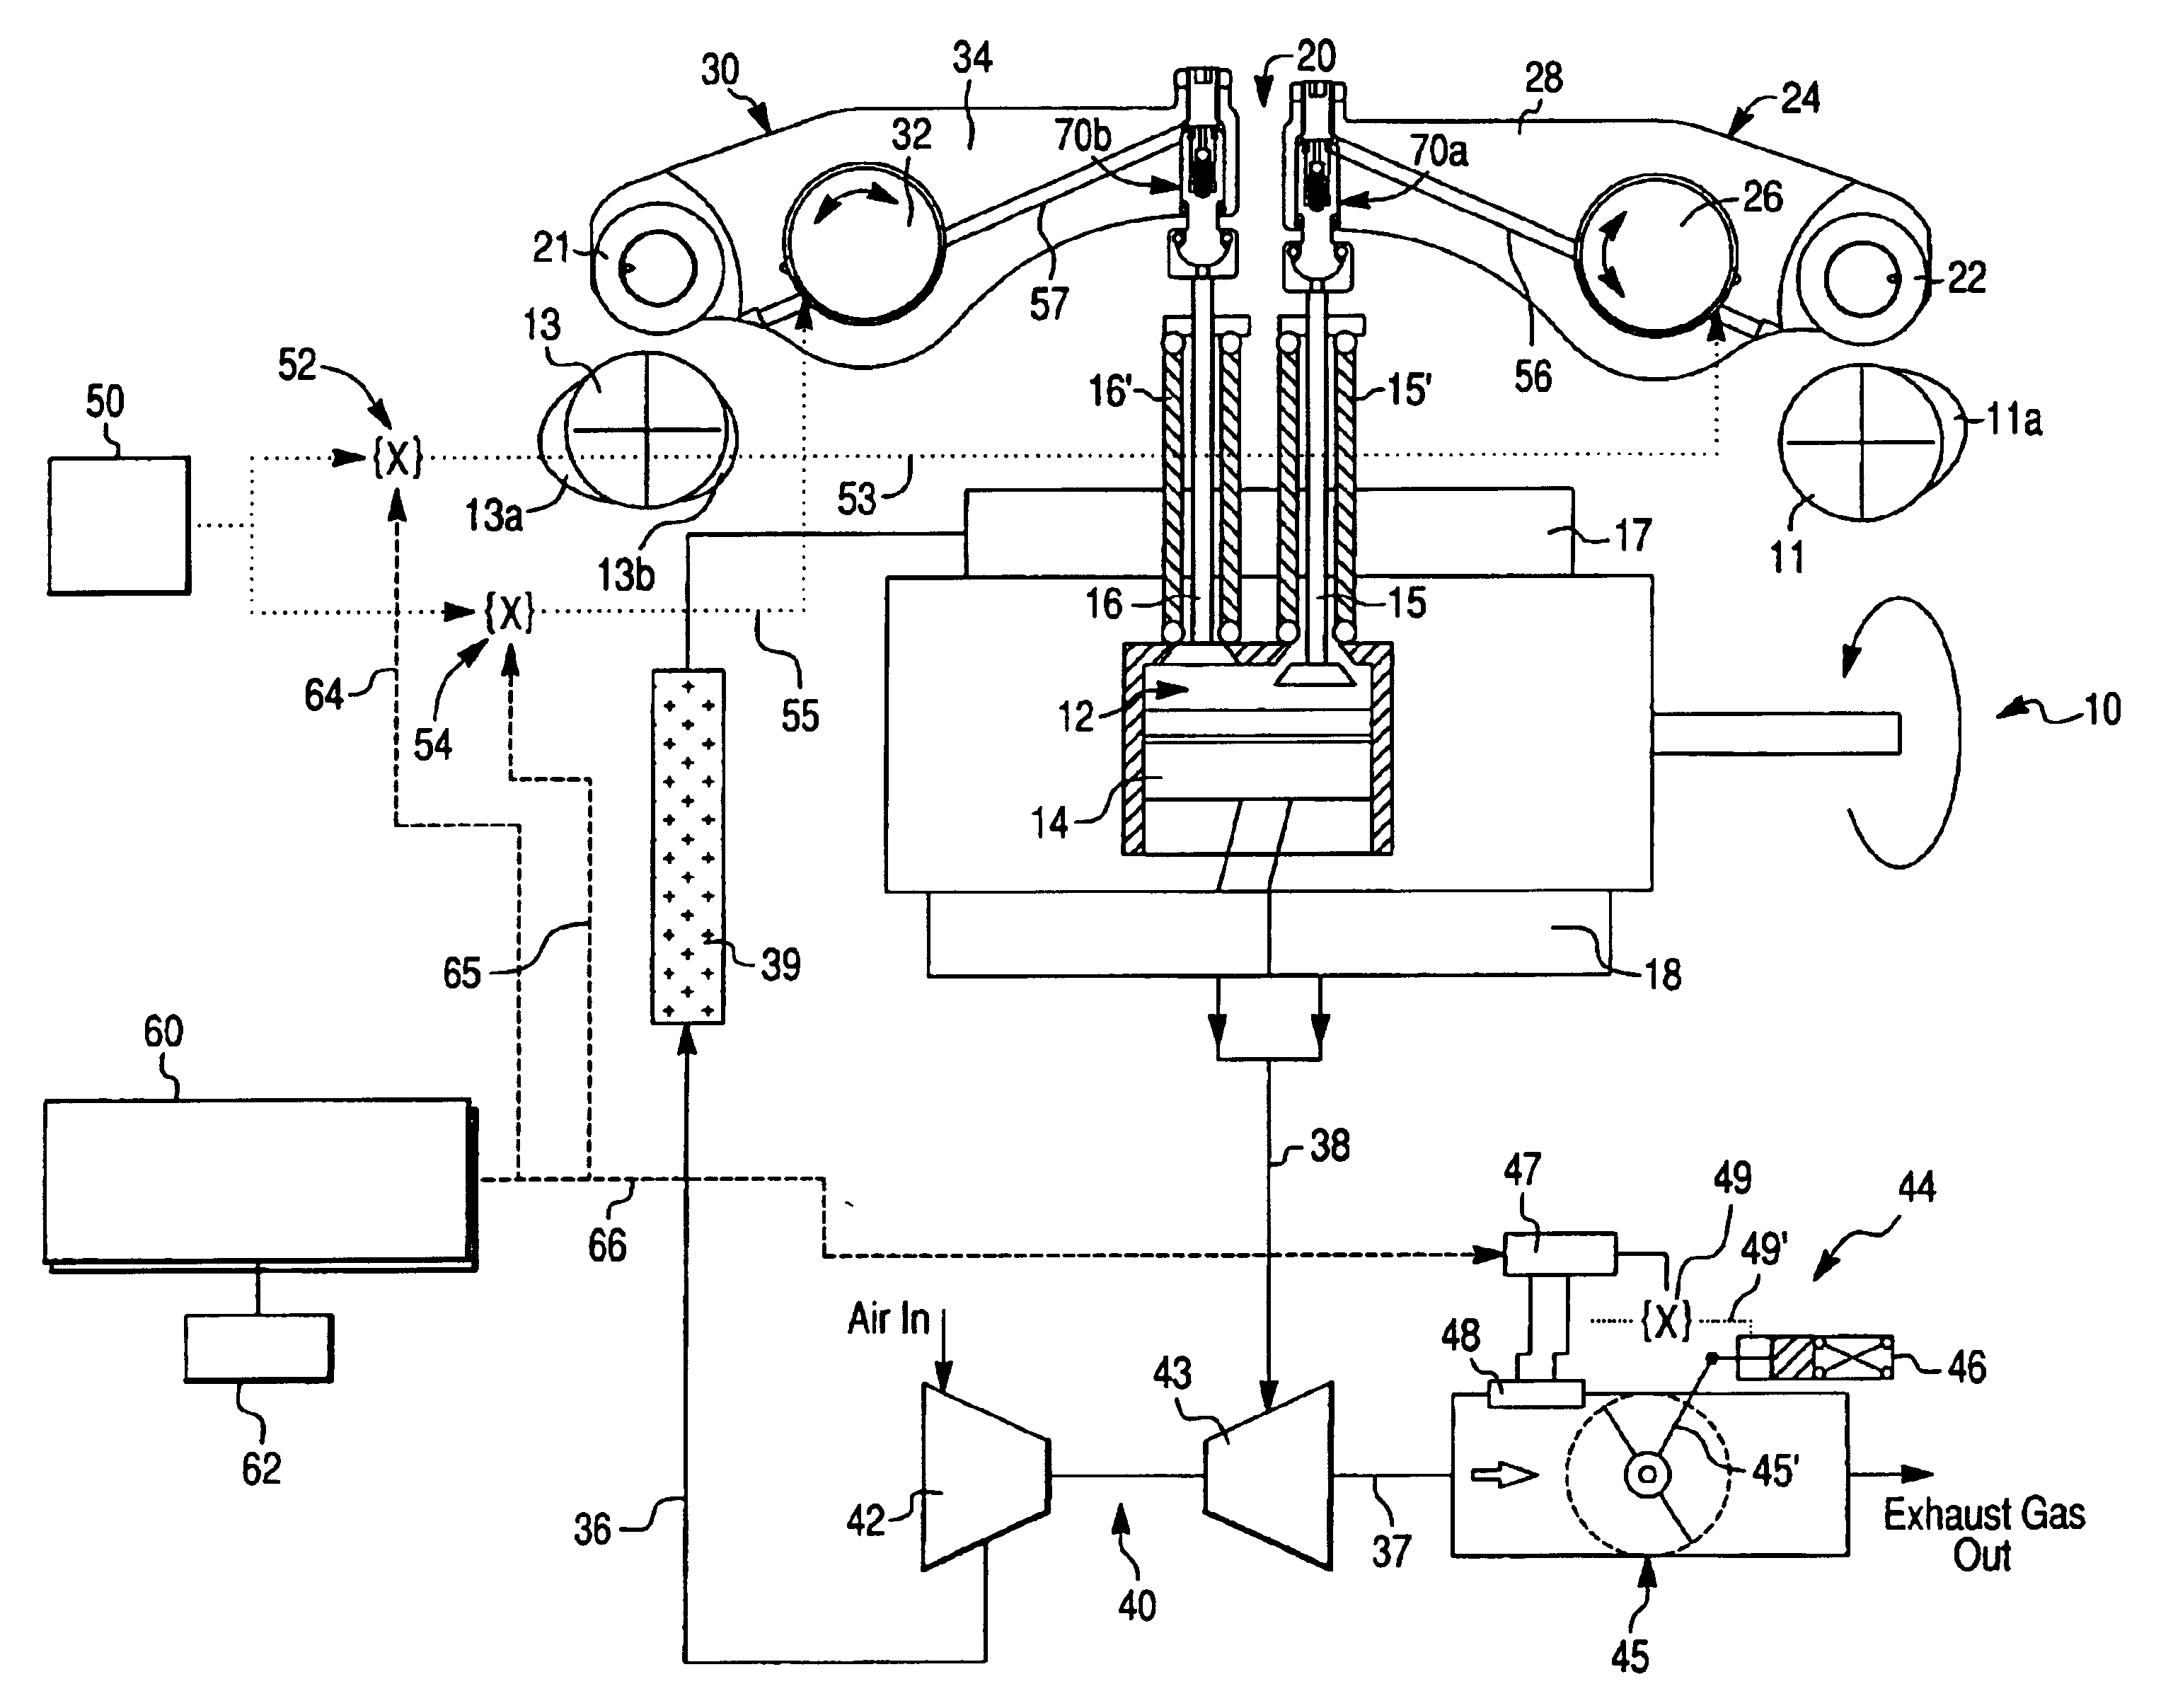 Modal variable valve actuation system for internal combustion engine and method for operating the same